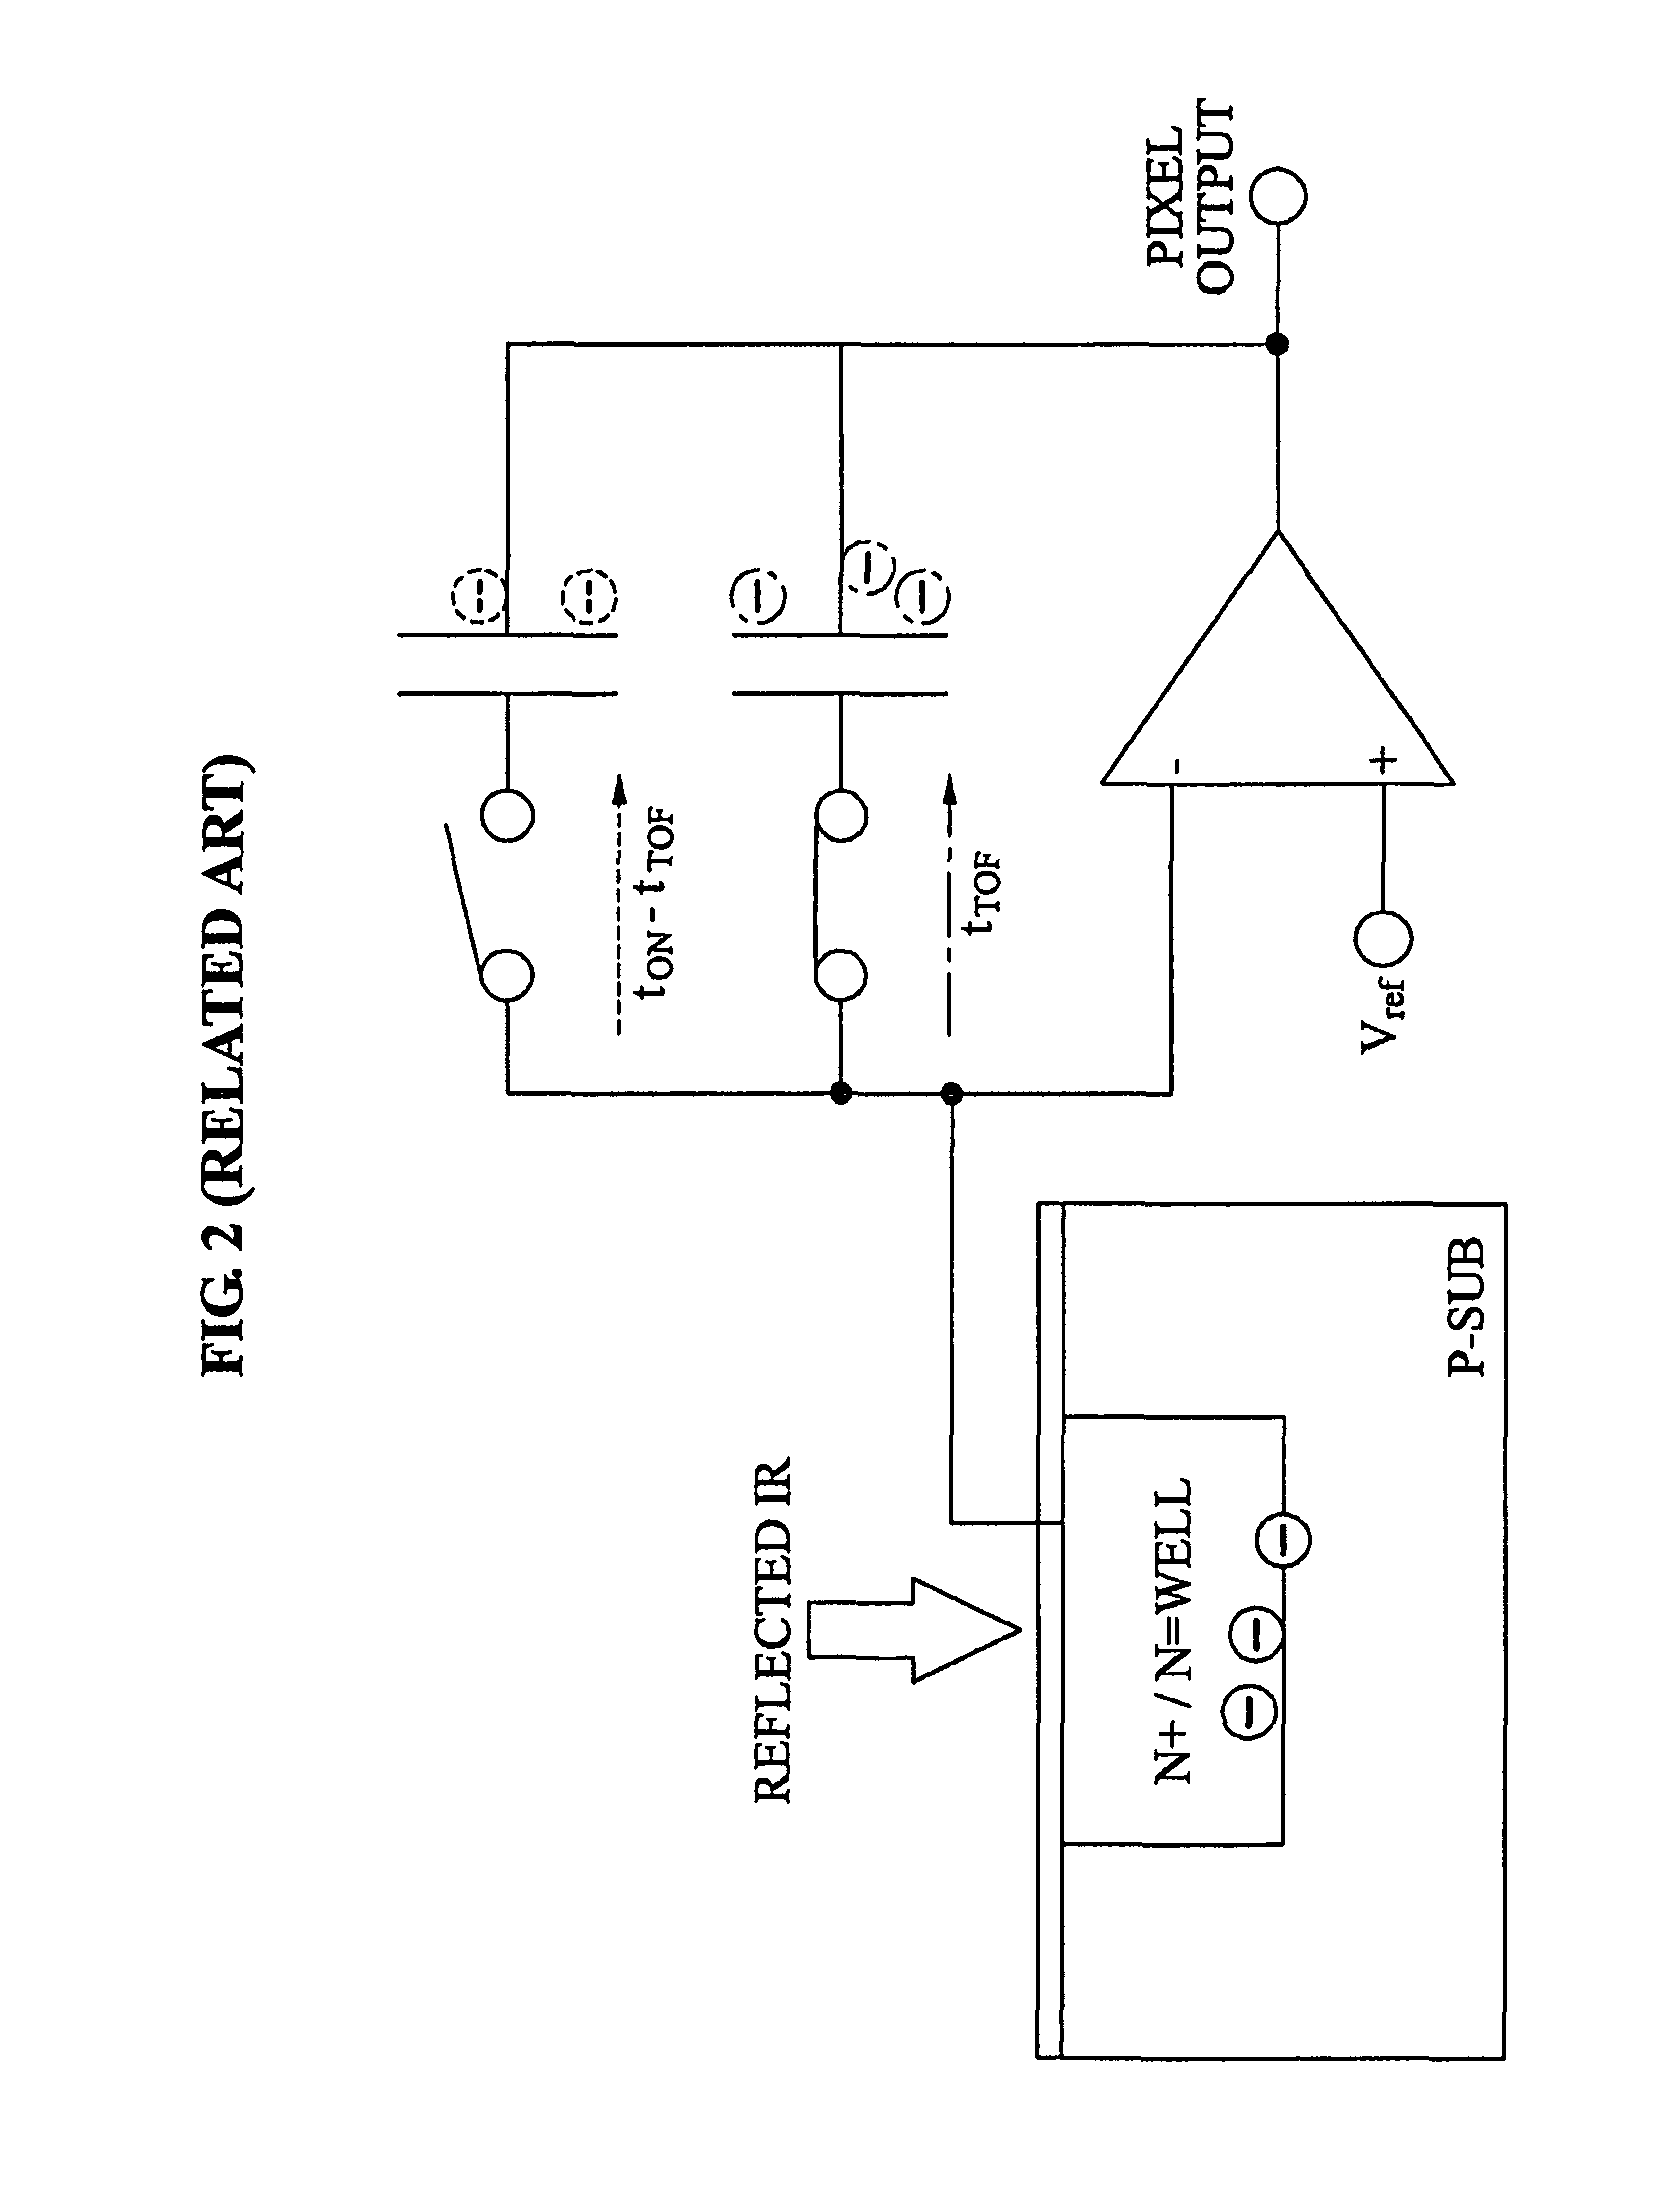 3D image processing method and apparatus for improving accuracy of depth measurement of an object in a region of interest